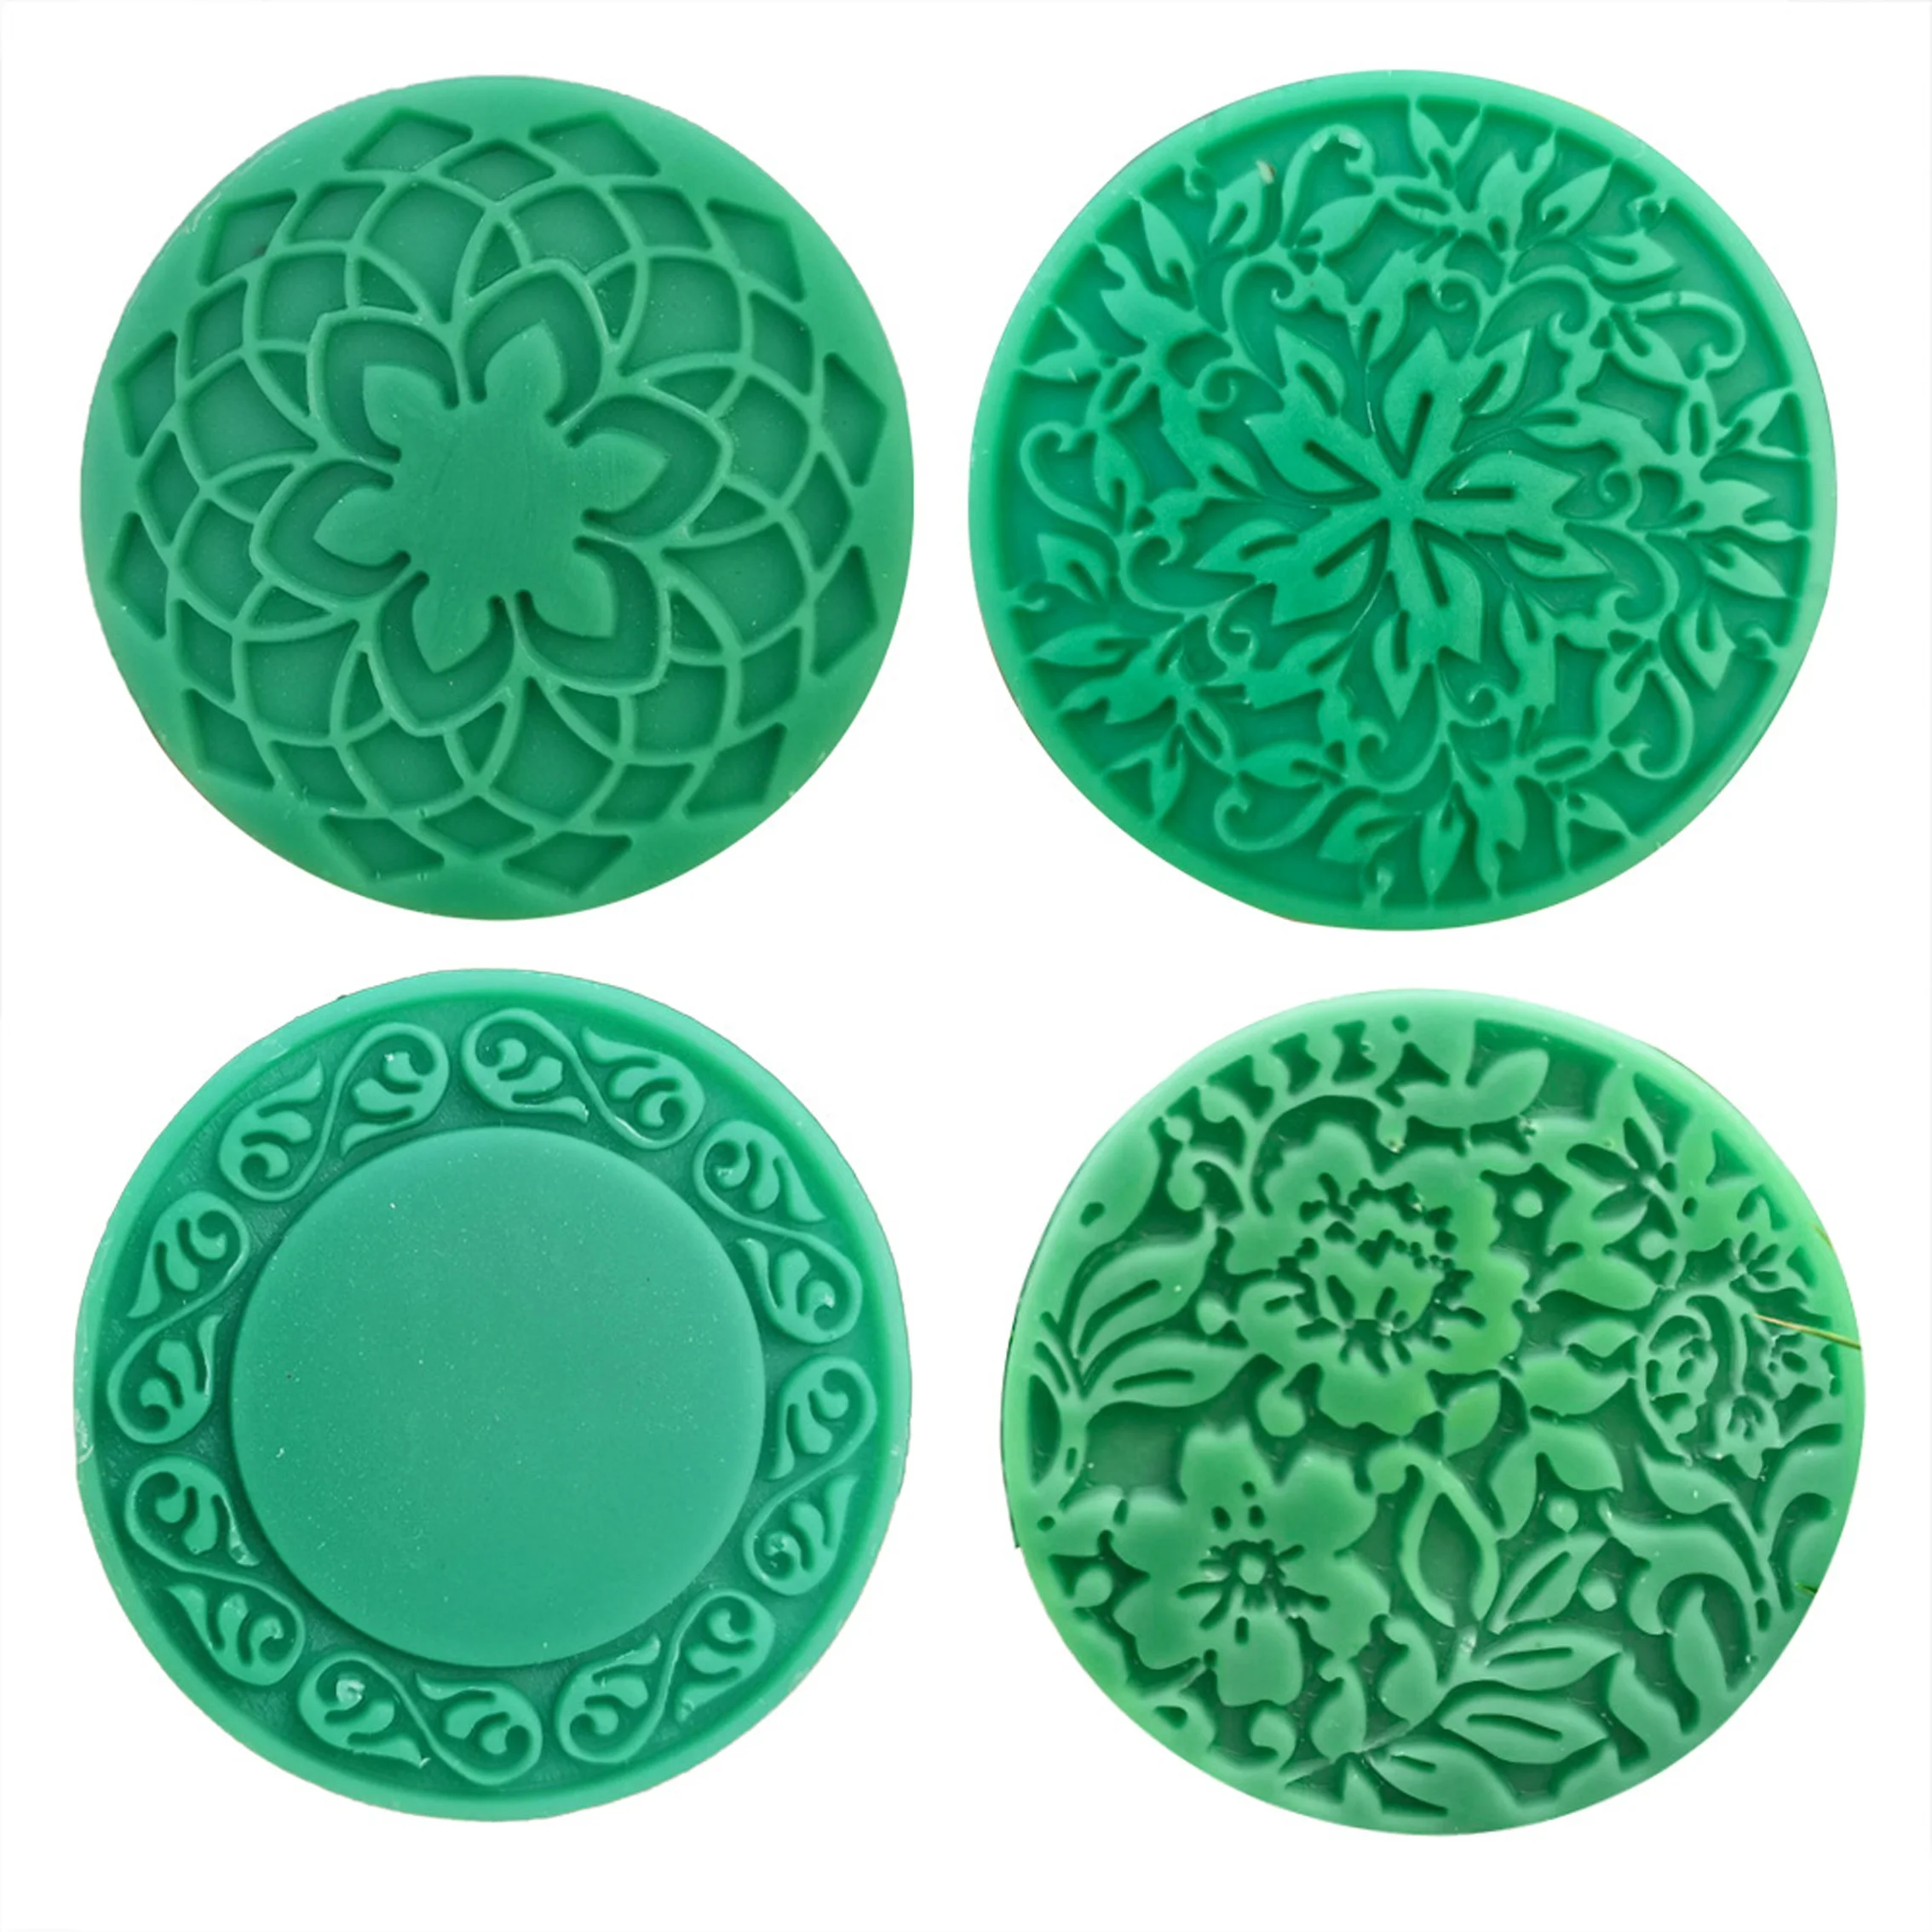 4 Cavity Round Flower Carved Shape Diy Cake Baker Pan Mold Silicone Mold For Soap Candle Making Cake Tools